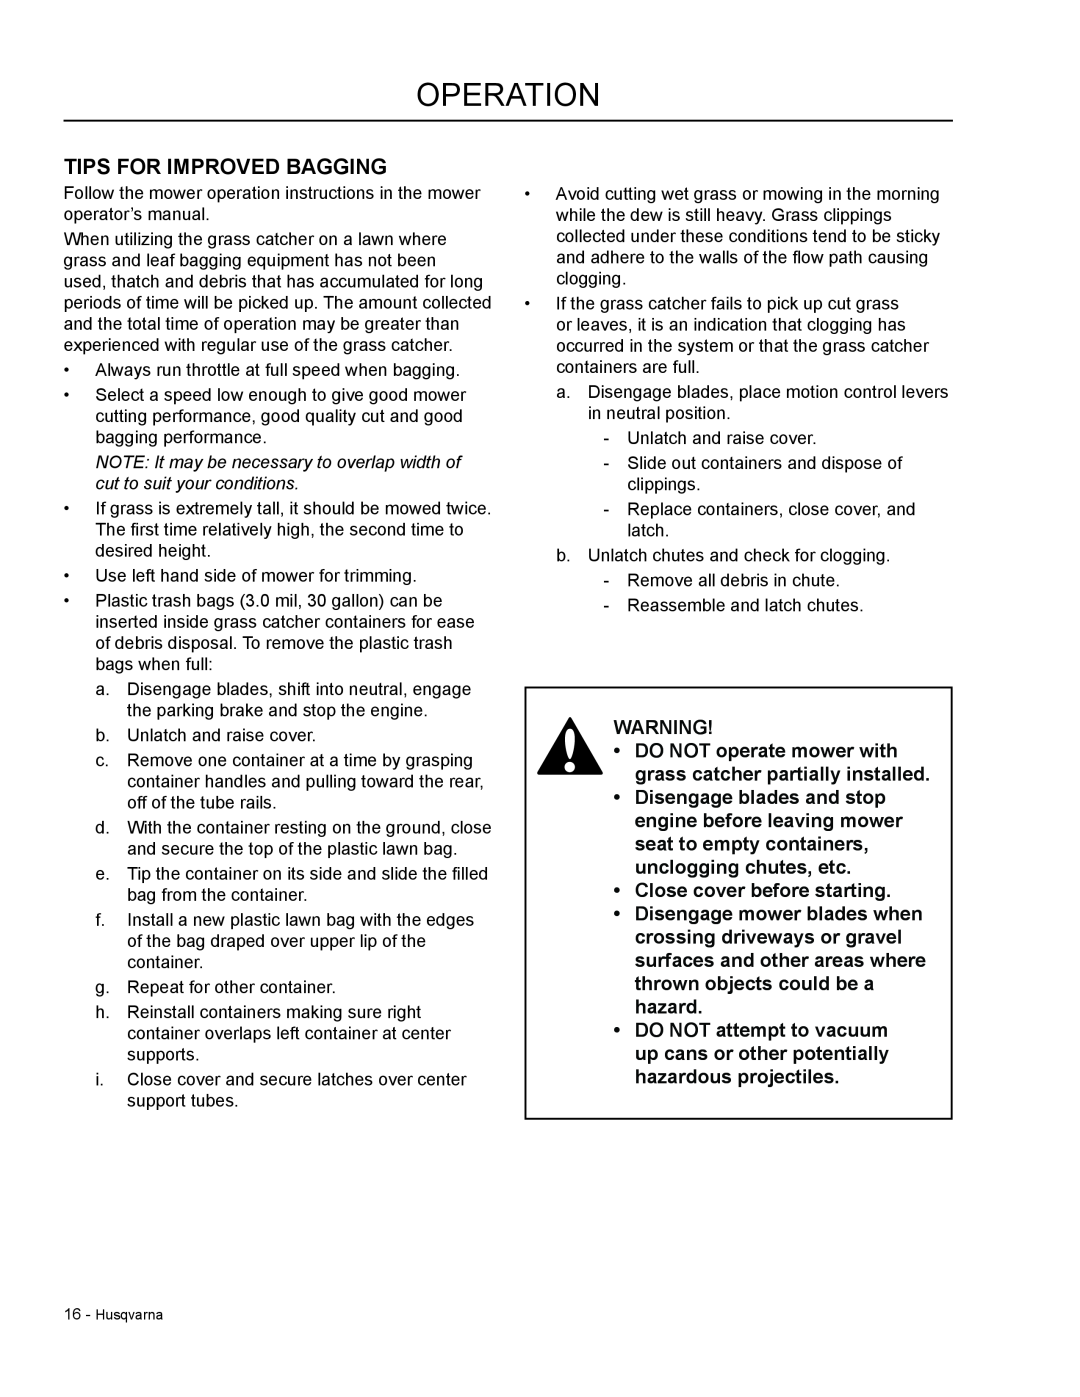 Dixon 966 004901 manual Operation, Tips For Improved Bagging, DO NOT operate mower with grass catcher partially installed 